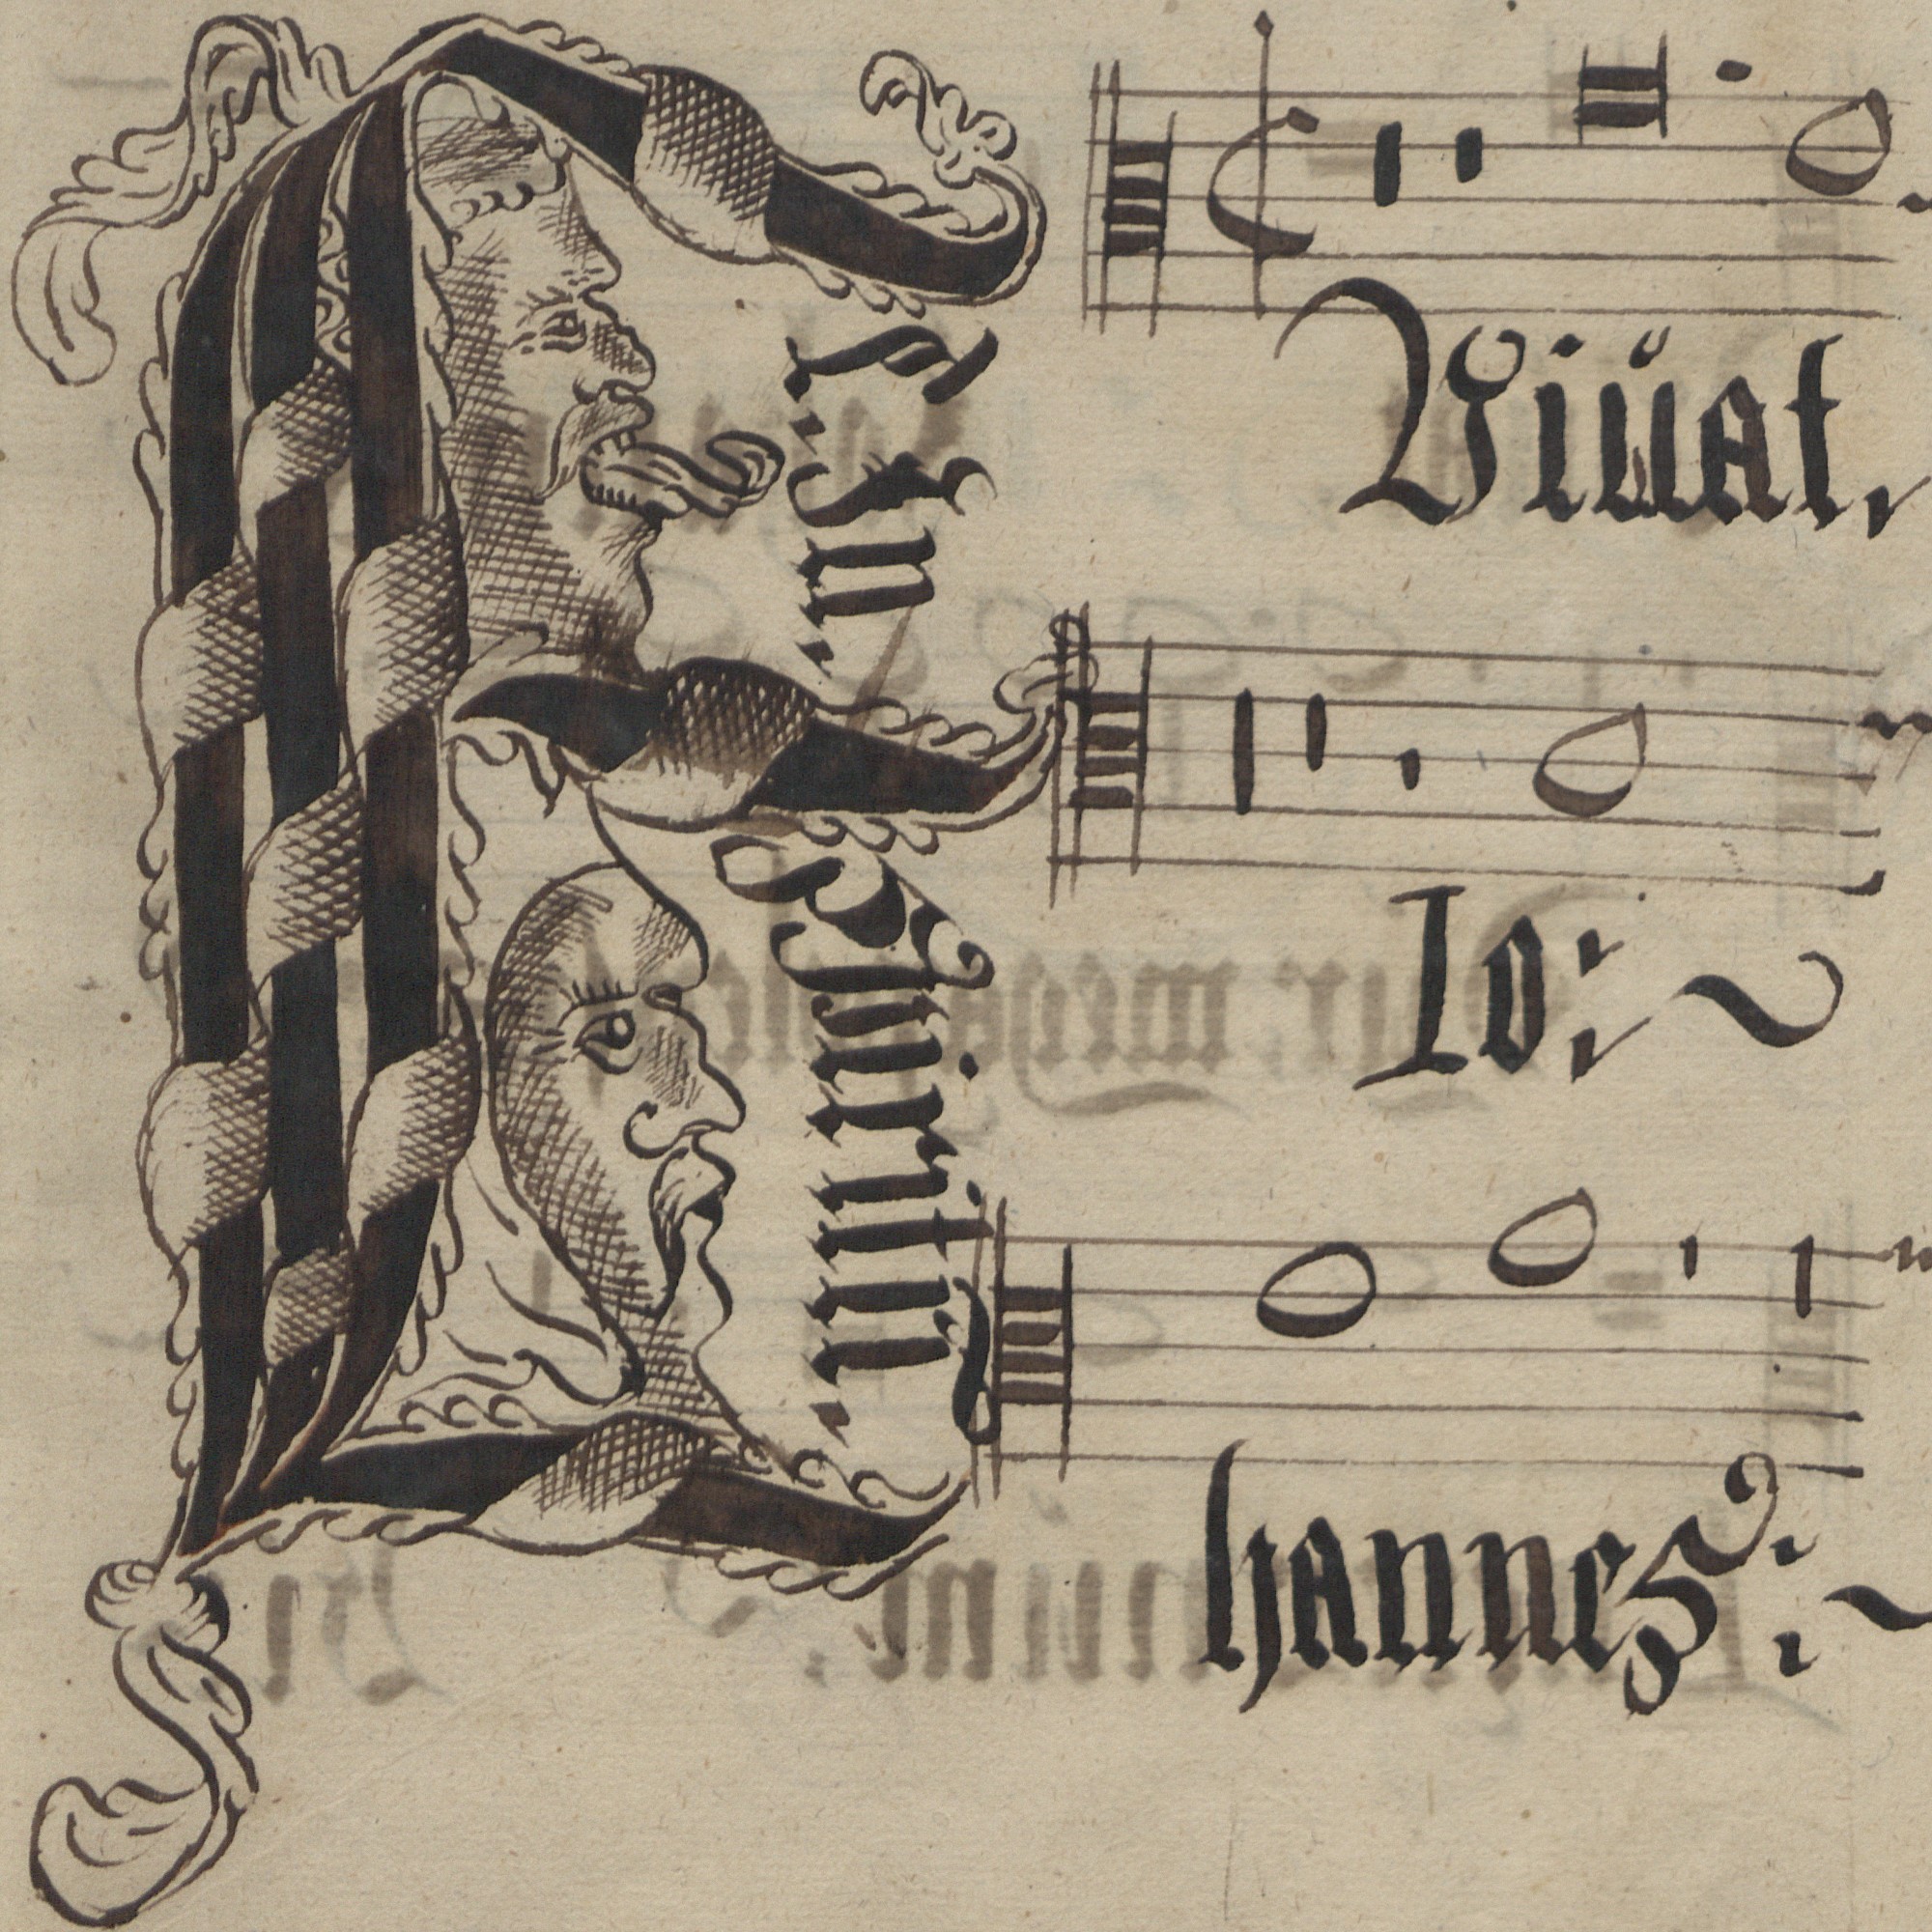 Decorated initial from a songbook compiled by Johannes Flamingus in 1571 in his own hand while chapelmaster in Schwerin (49161 05R, Mus. saec. XVI.19 (5), page 45)